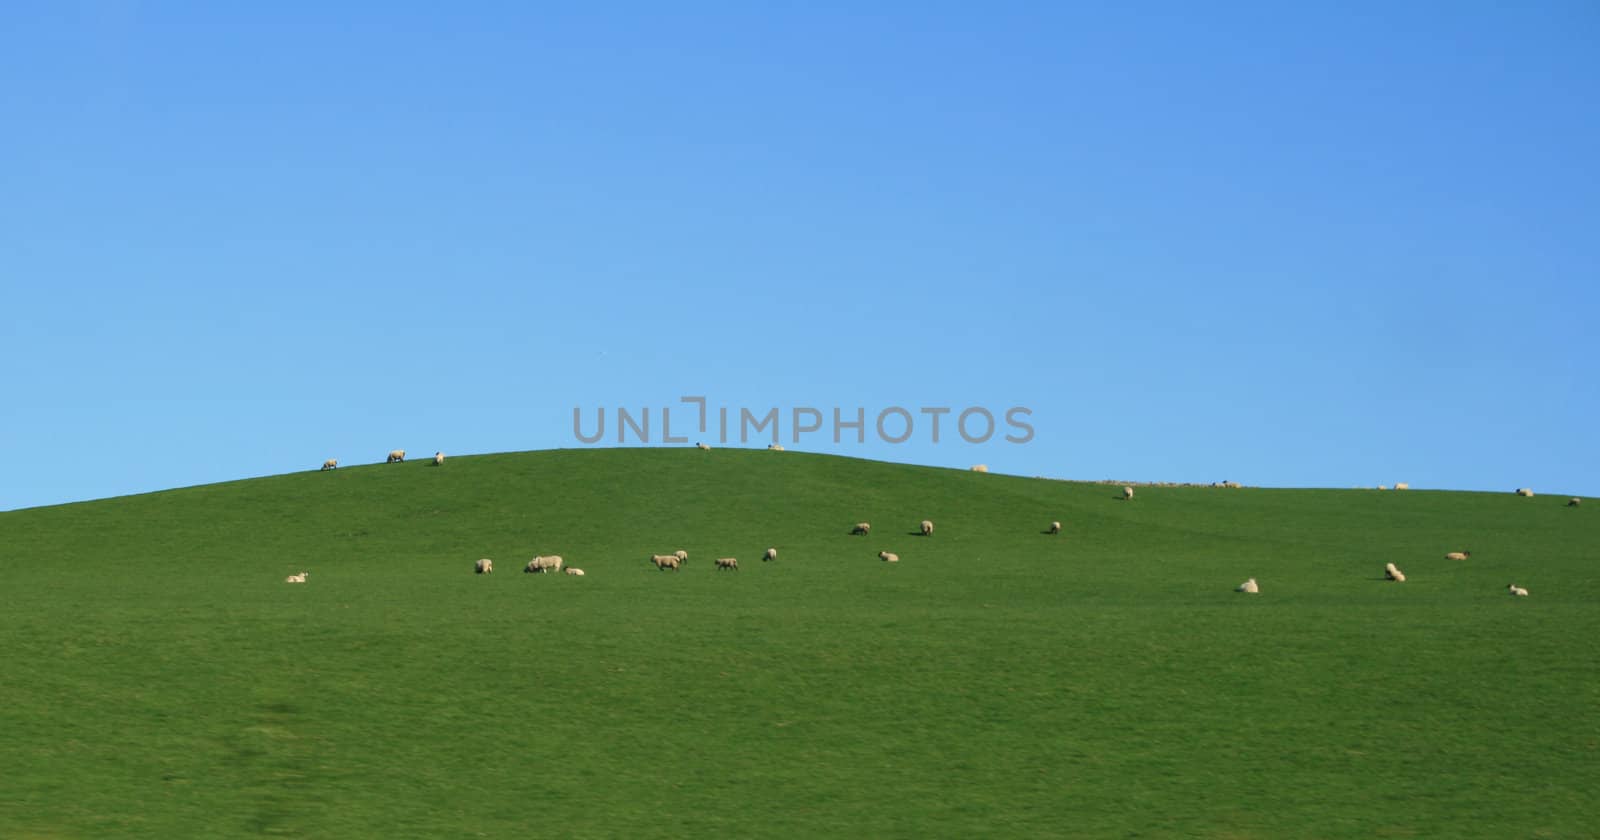 sheep in a field by leafy